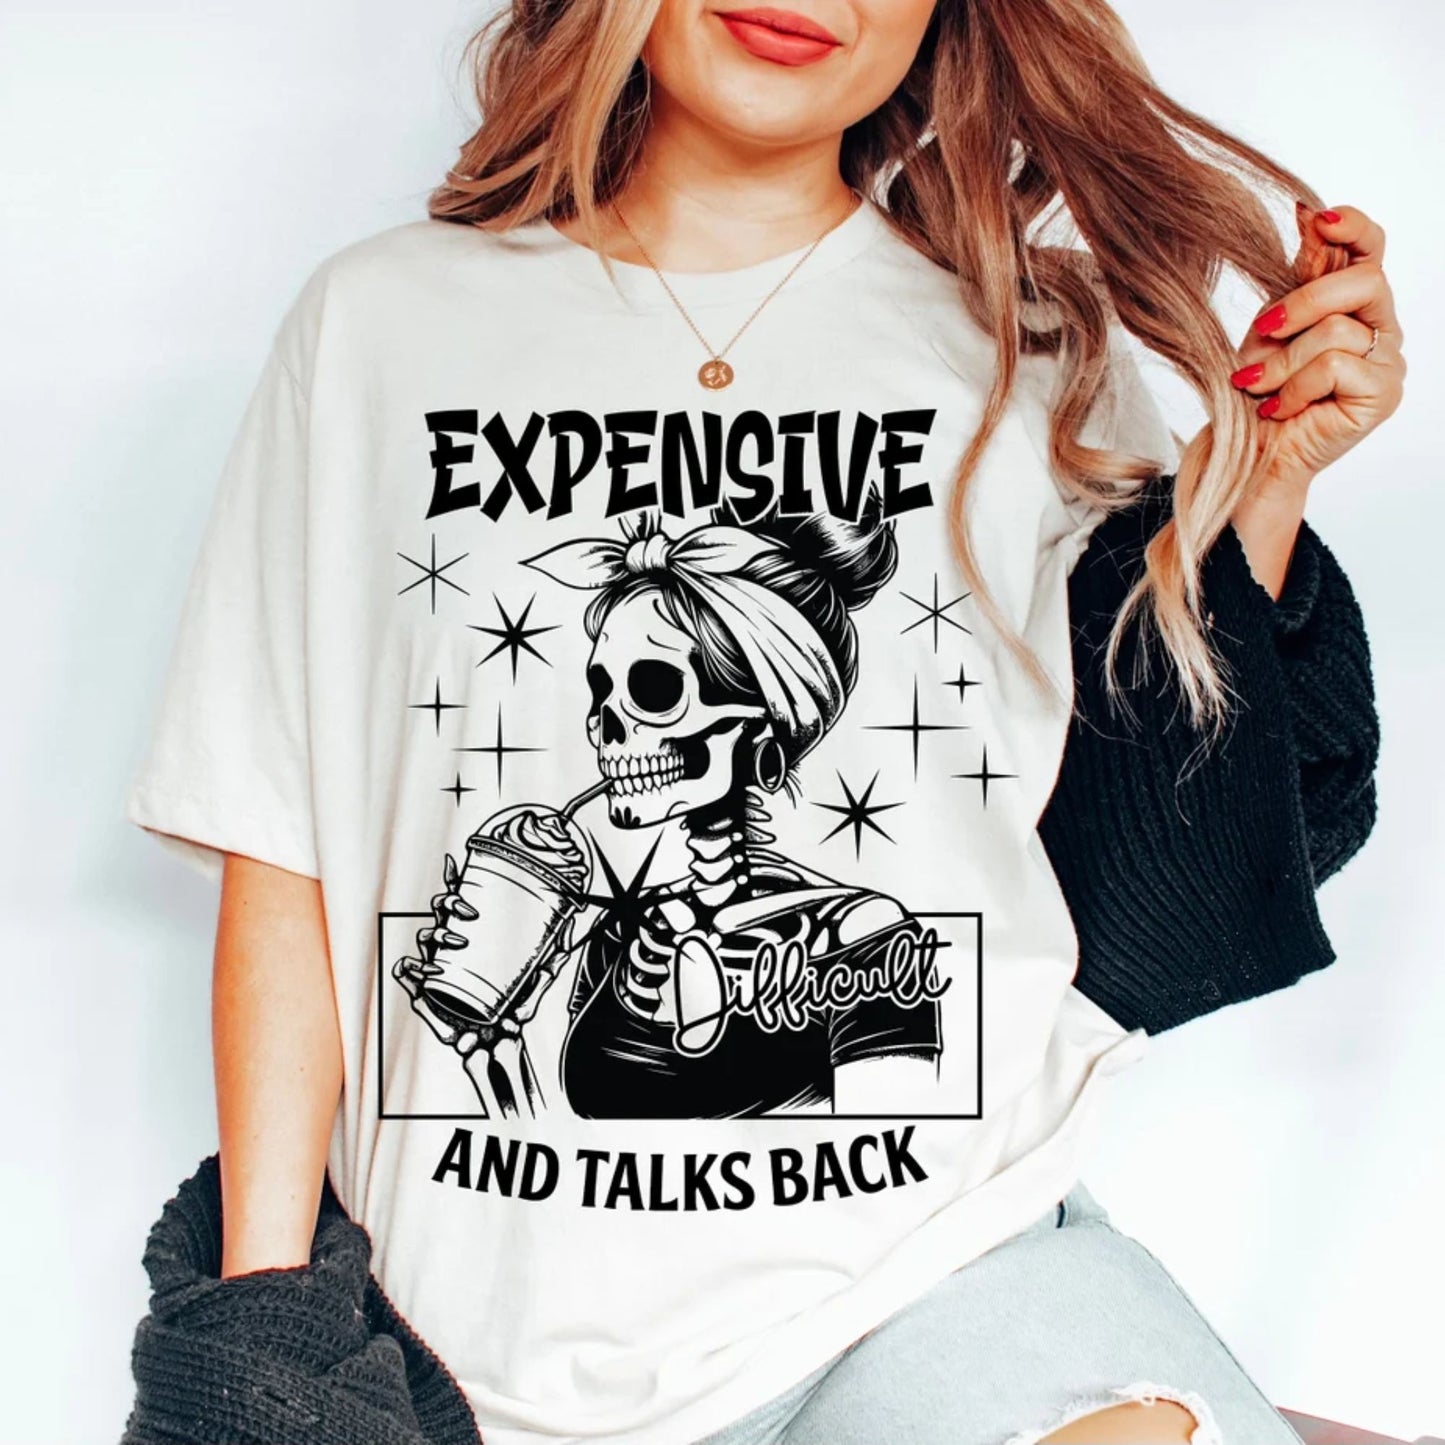 Expensive Difficult And Talks Back T-Shirt, Mom Skeleton